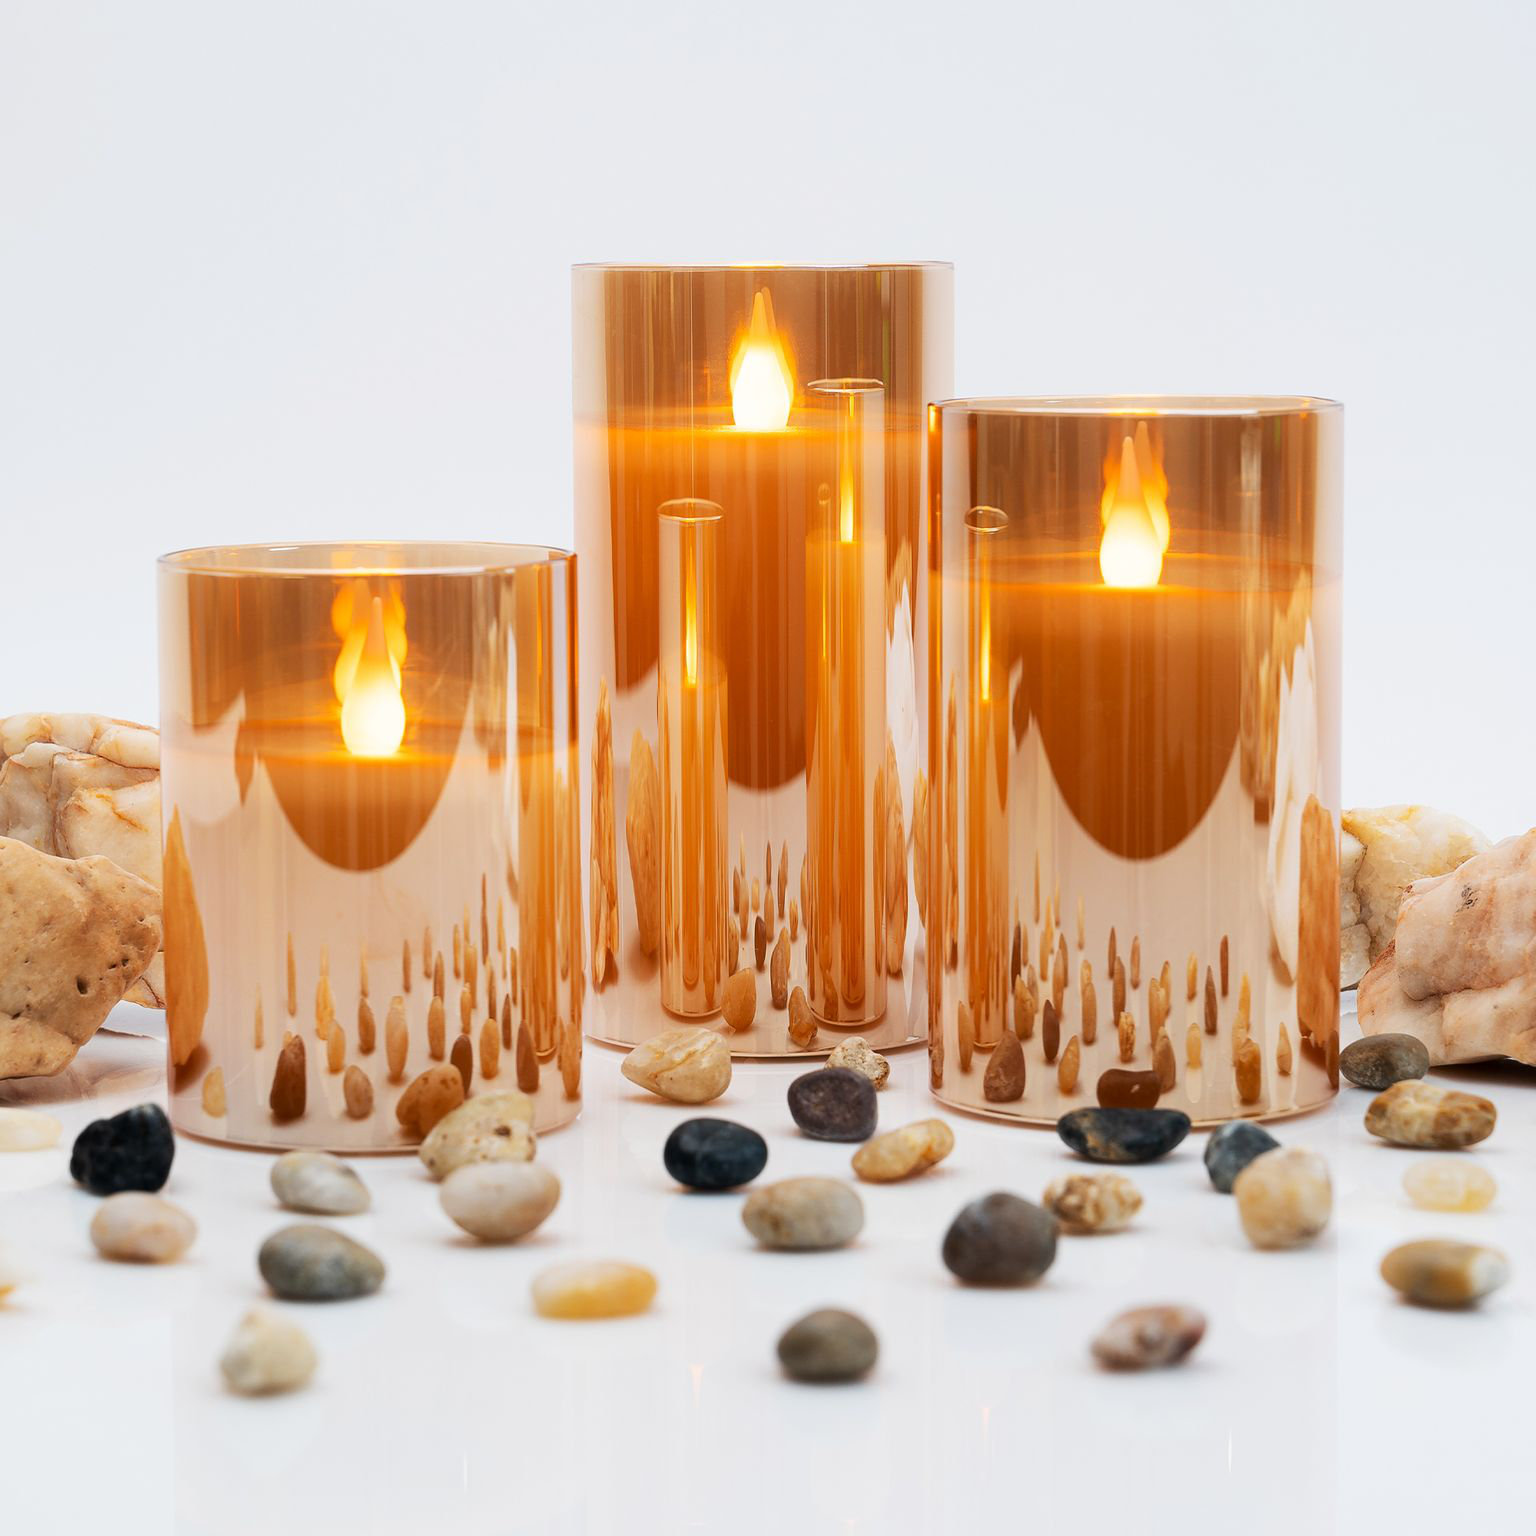 Set of candles of 3 PCs, famous luxury brand - AliExpress